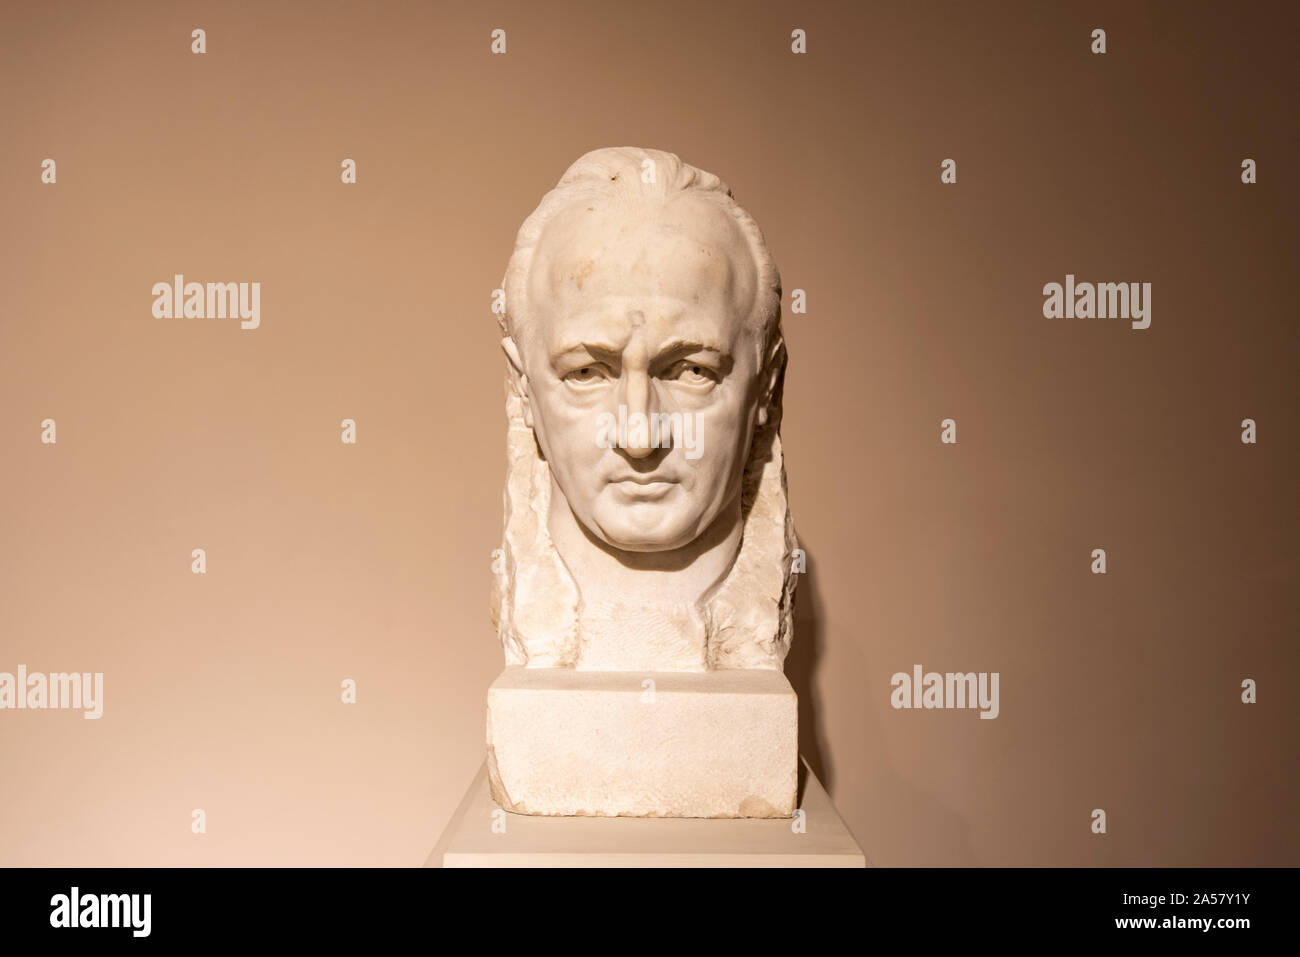 Portrait of composer Fikret Amirov, a sculpture by Calal Qaryagdi, 1960. Azerbaijan State Museum of Art (National Art Museum of Azerbaijan), Baku. Aze Stock Photo